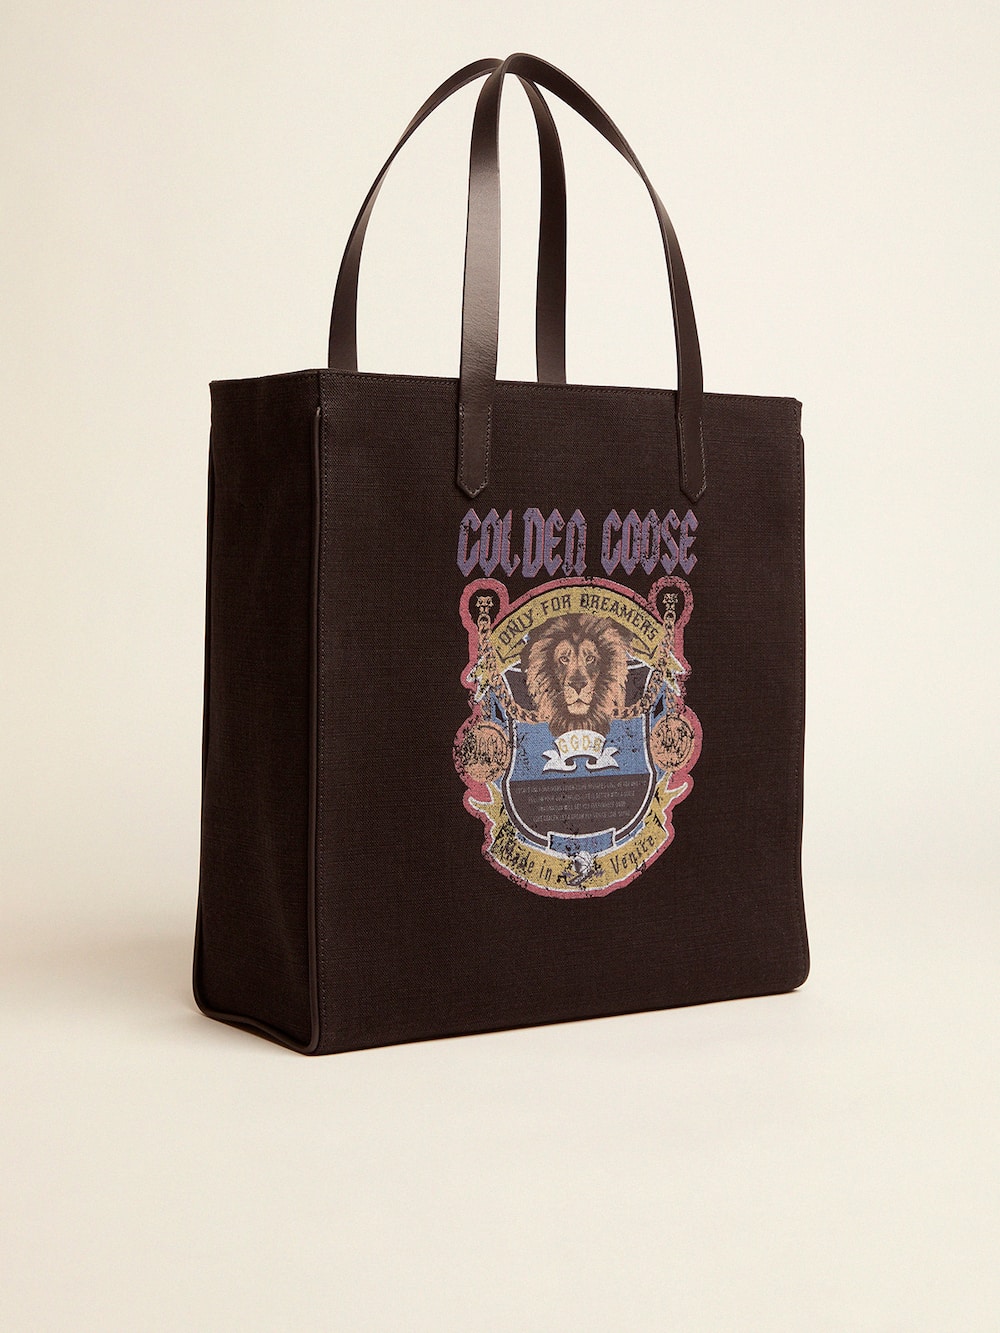 Golden Goose - Black California North-South bag with vintage print in 